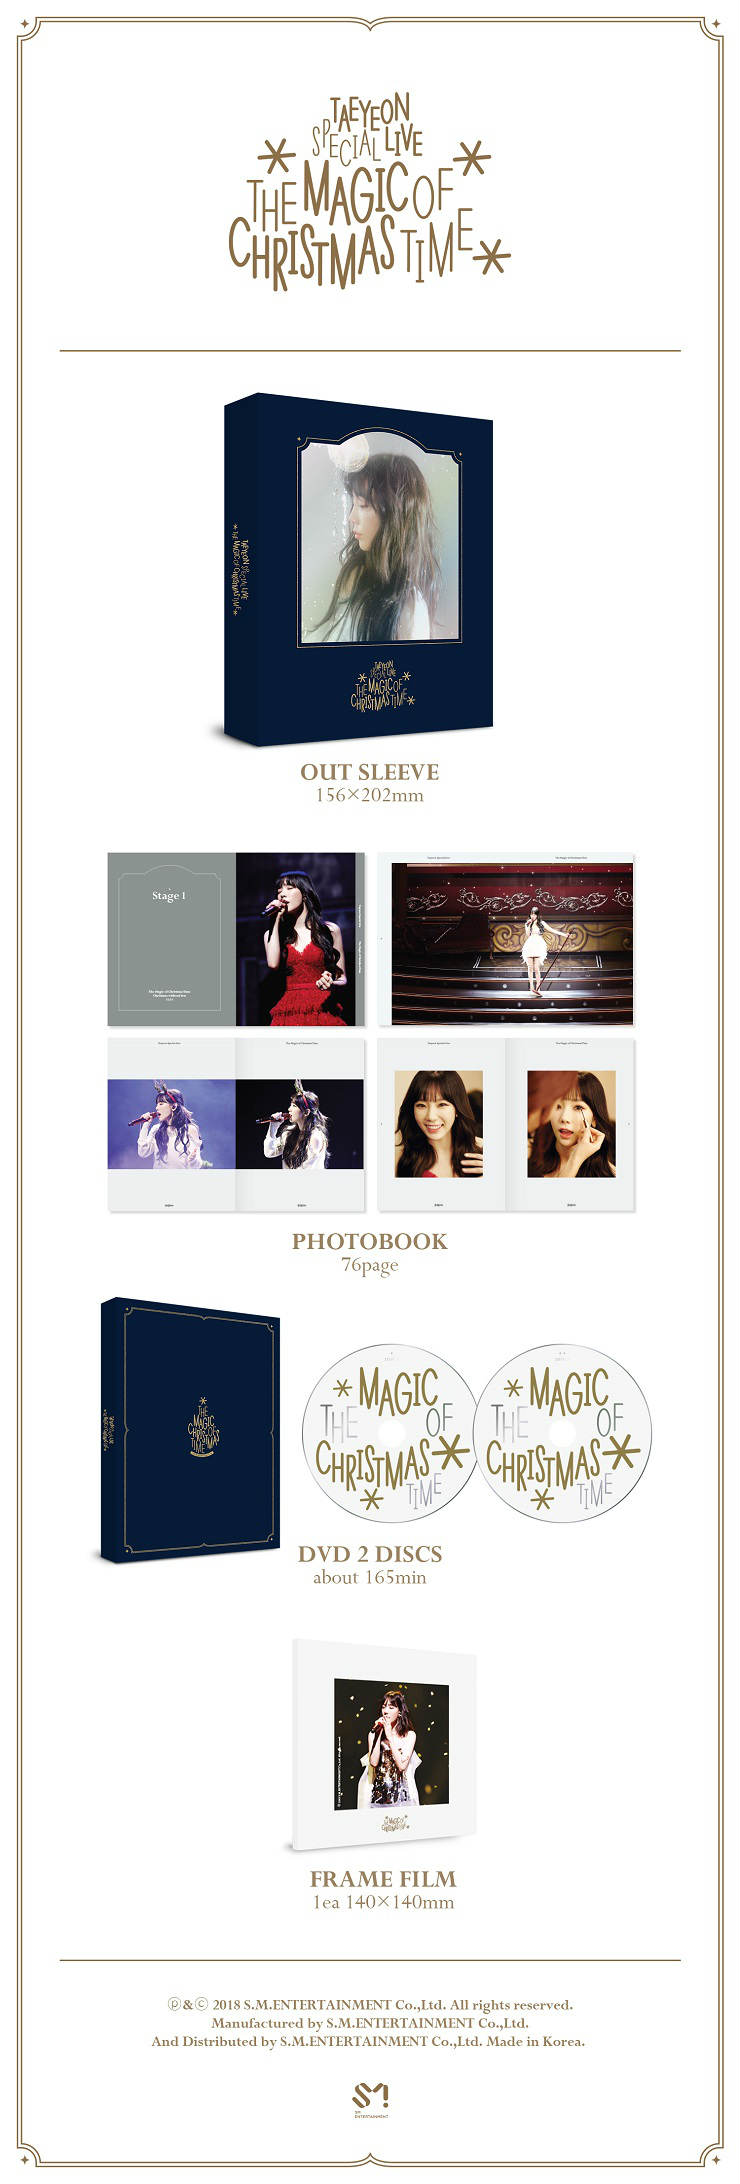 TAEYEON - TAEYEON Special Live THE MAGIC OF CHRISTMAS TIME